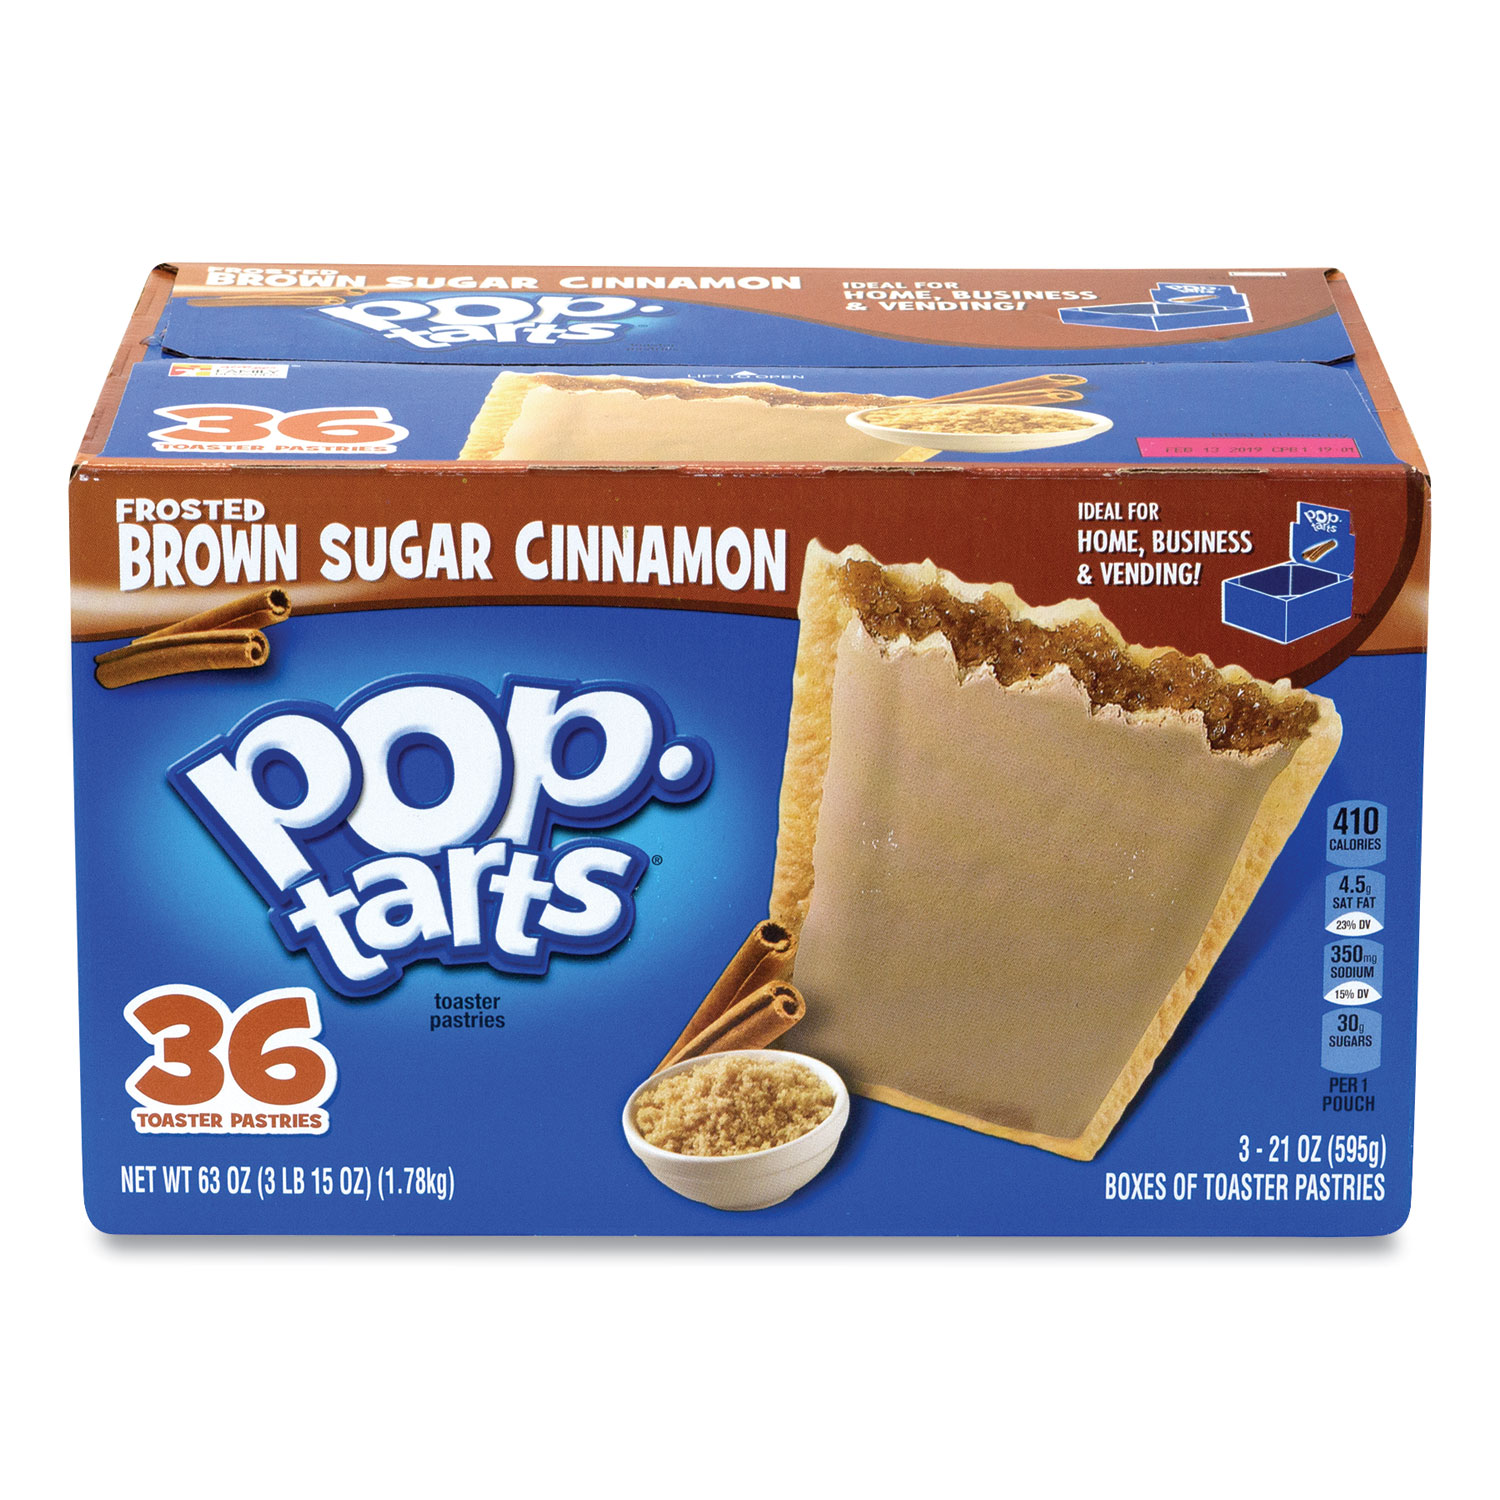  Kellogg's 23731 Pop Tarts, Brown Sugar Cinnamon, 3.52 oz Pouch, 2 Tarts/Pouch, 6 Pouches/Pack, 3 PK/Box, Free Delivery in 1-4 Business Days (GRR90000115) 